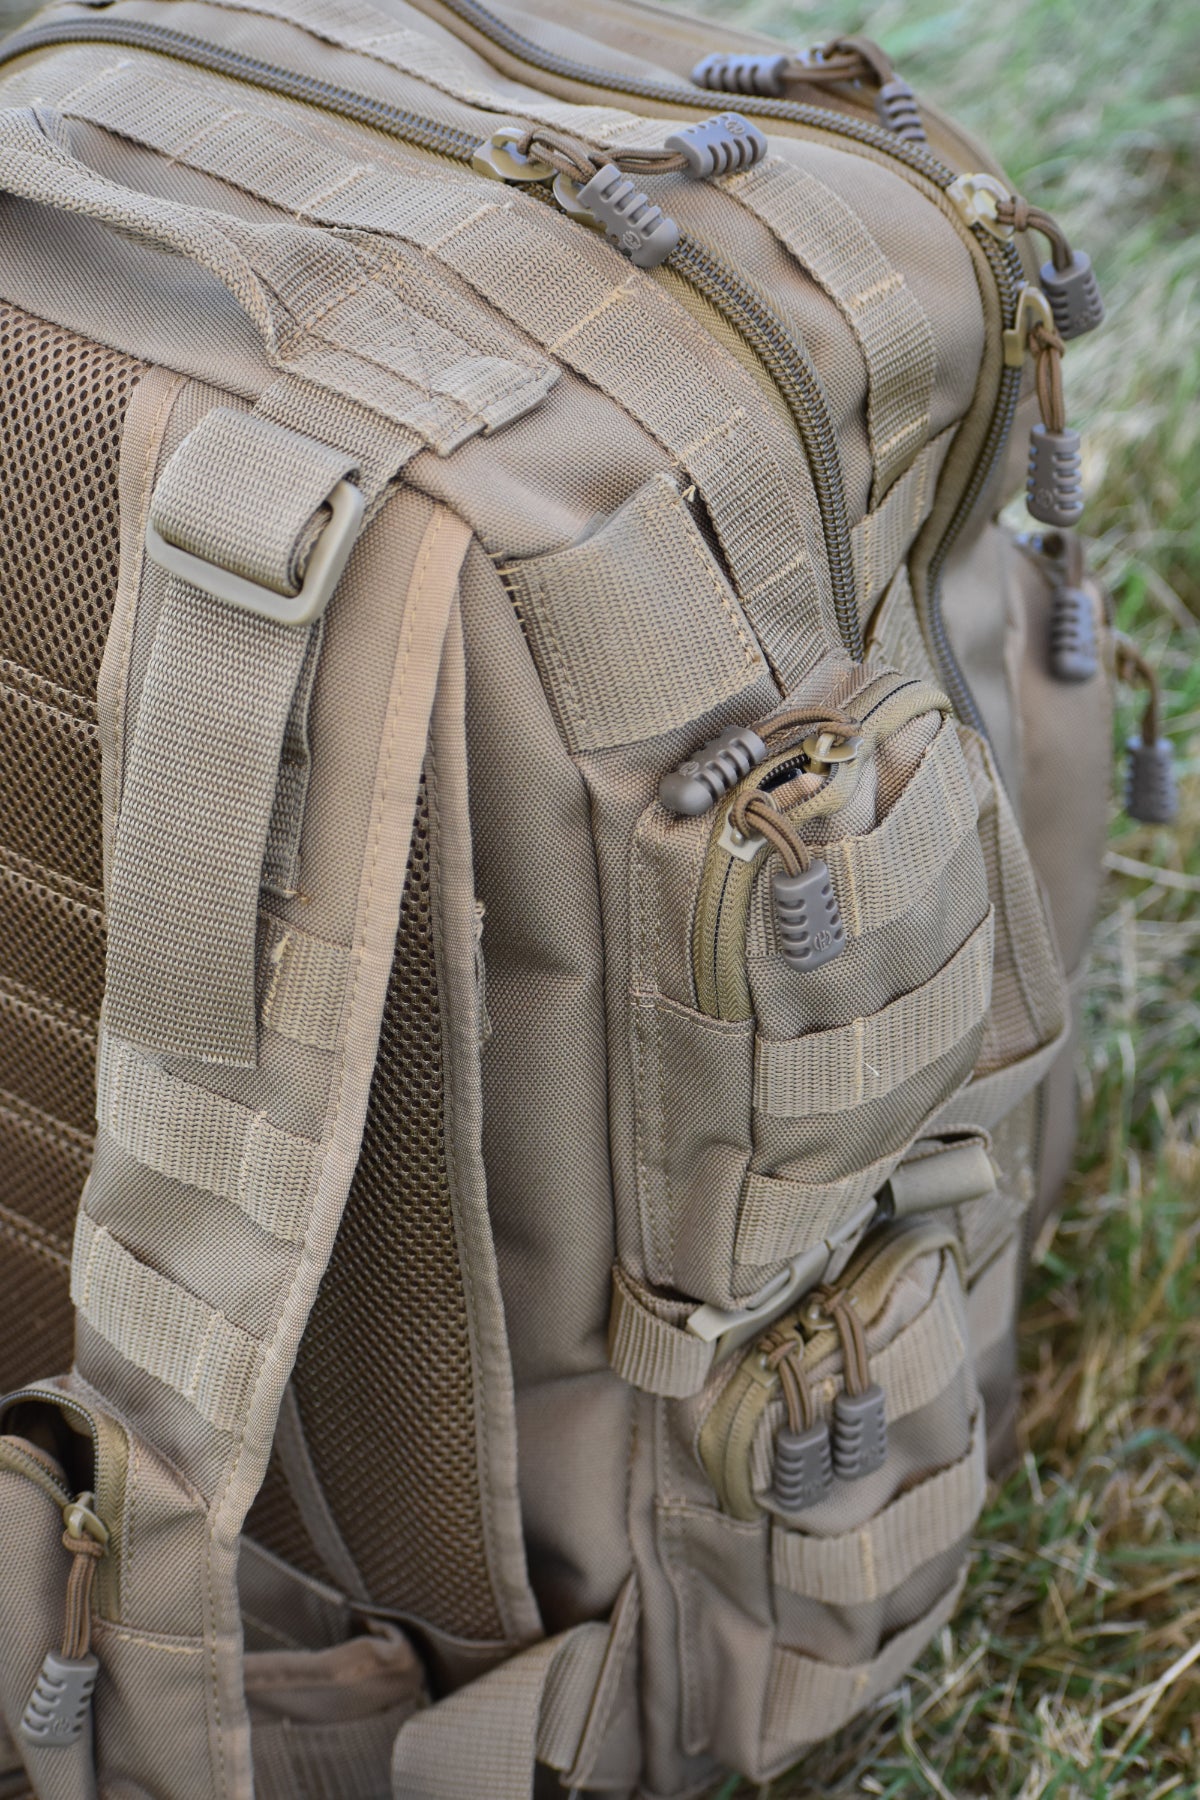 Flying Circle Brazos Concealed Carry Backpack Review - AllOutdoor.com